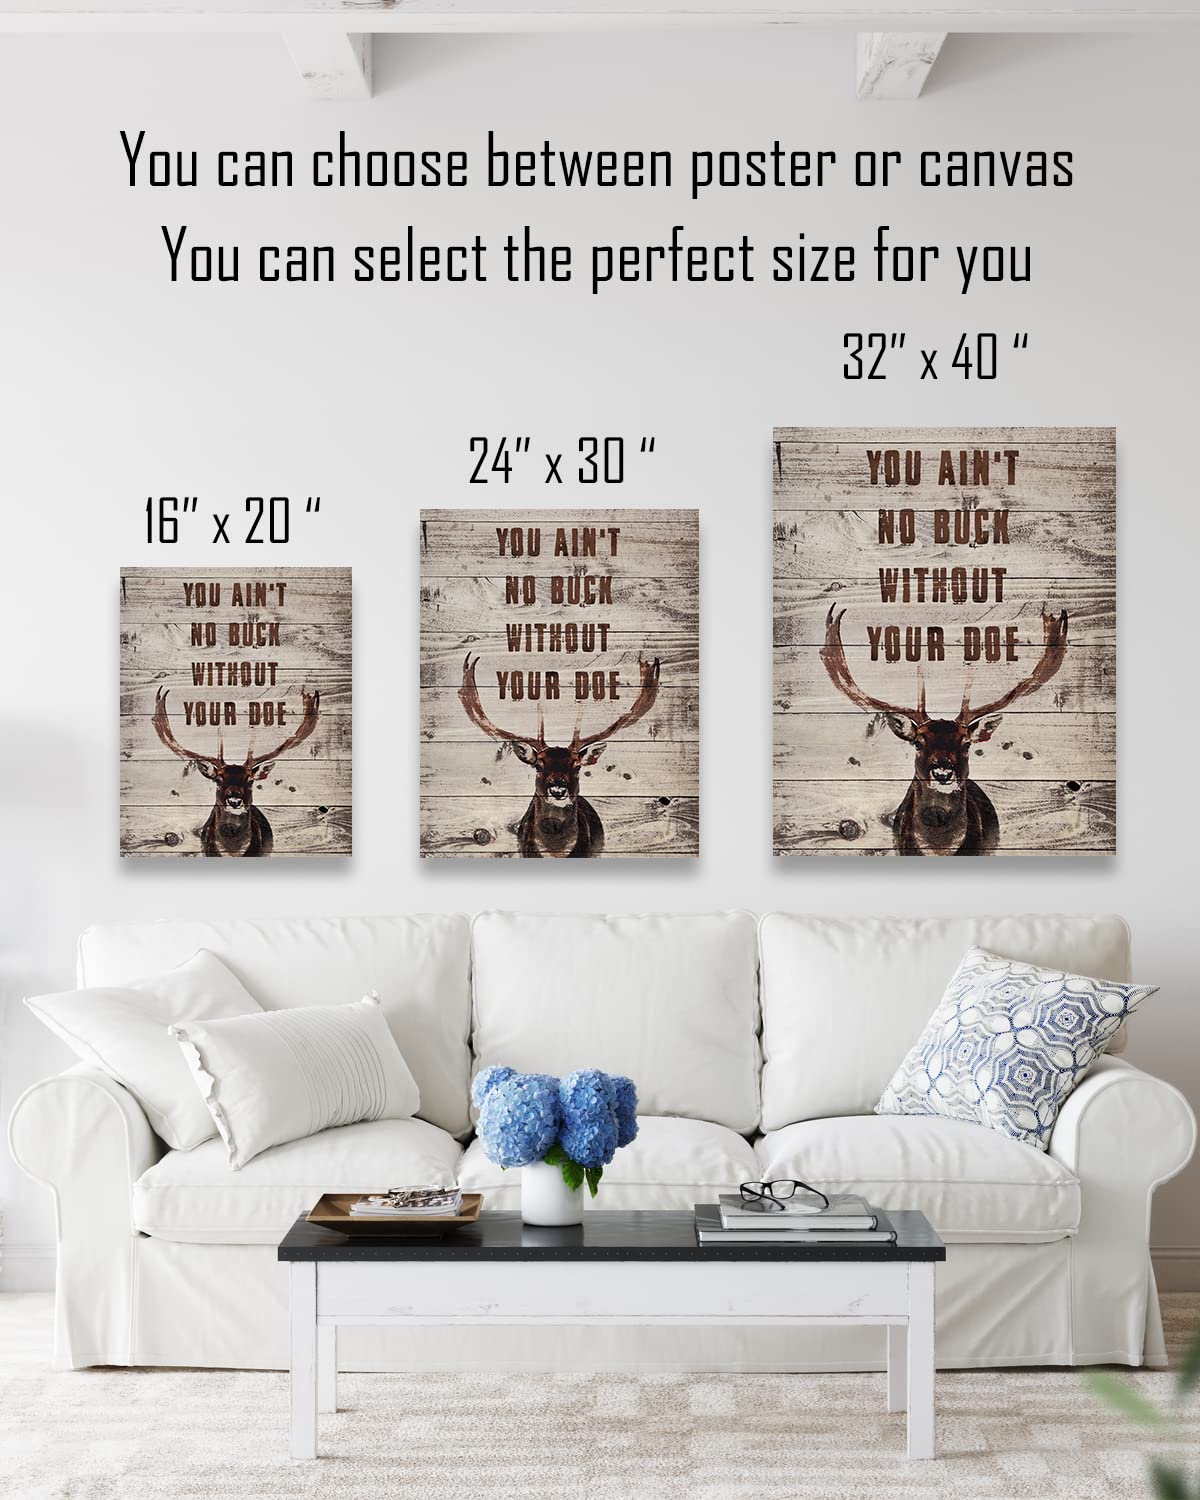 You Ain't No Buck Without Your Doe - Hunting Decor - Hunting Wall Art Decor - Gifts for Hunters - Rustic Hunting Cabin Decor - Farmhouse Hunting Wall Decor